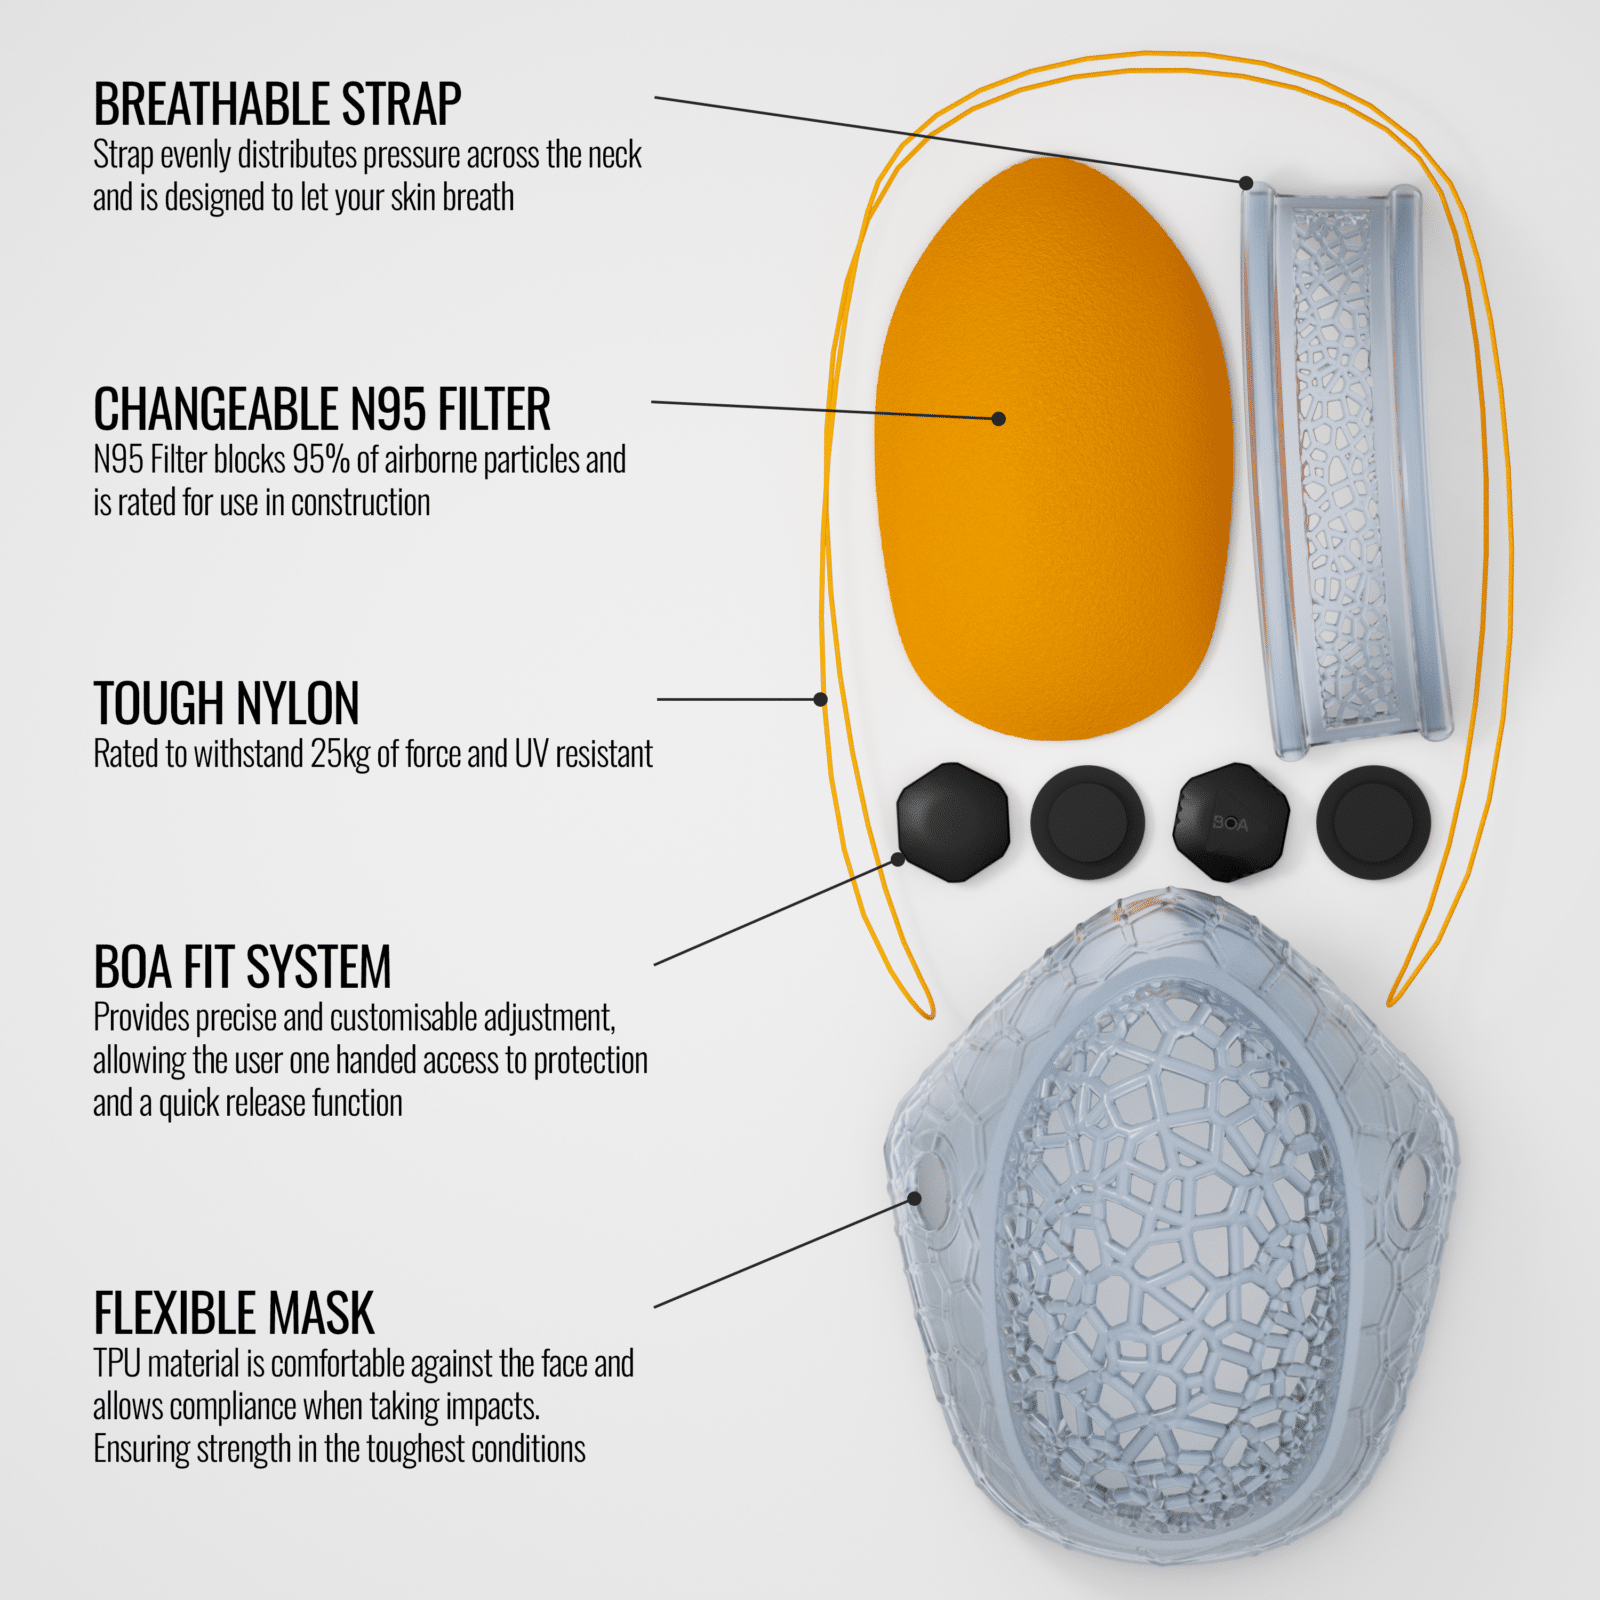 The ASA respirator components laid out on a white background, with text indicating various features of the mask. Such as a Tough Nylon cord, rated to withstand 25kg of force and UV resistant